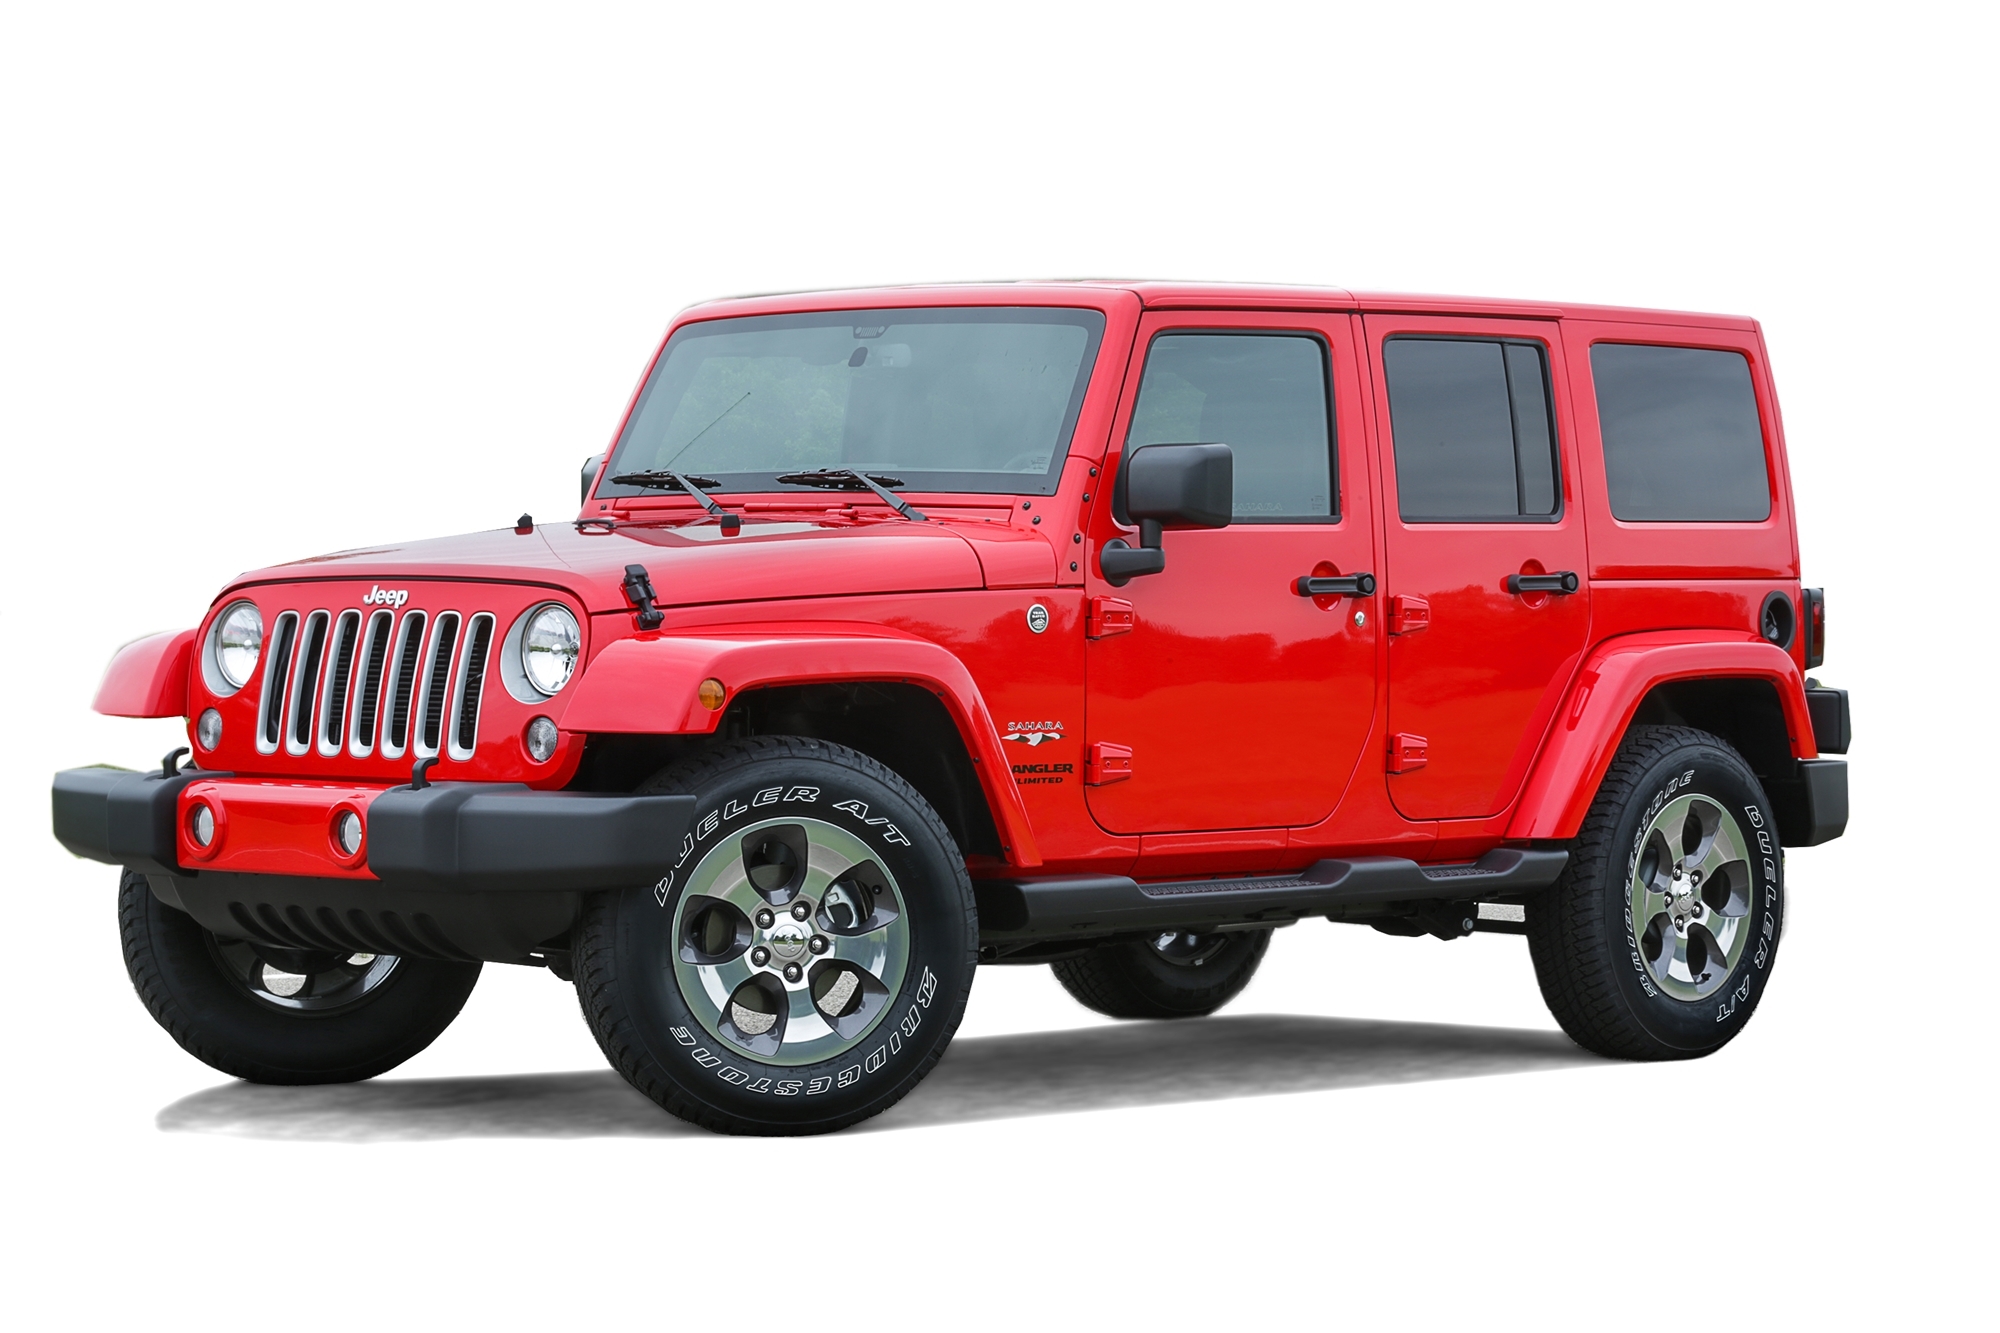 2015 Jeep Wrangler Unlimited Rubicon Full Specs, Features and Price |  CarBuzz